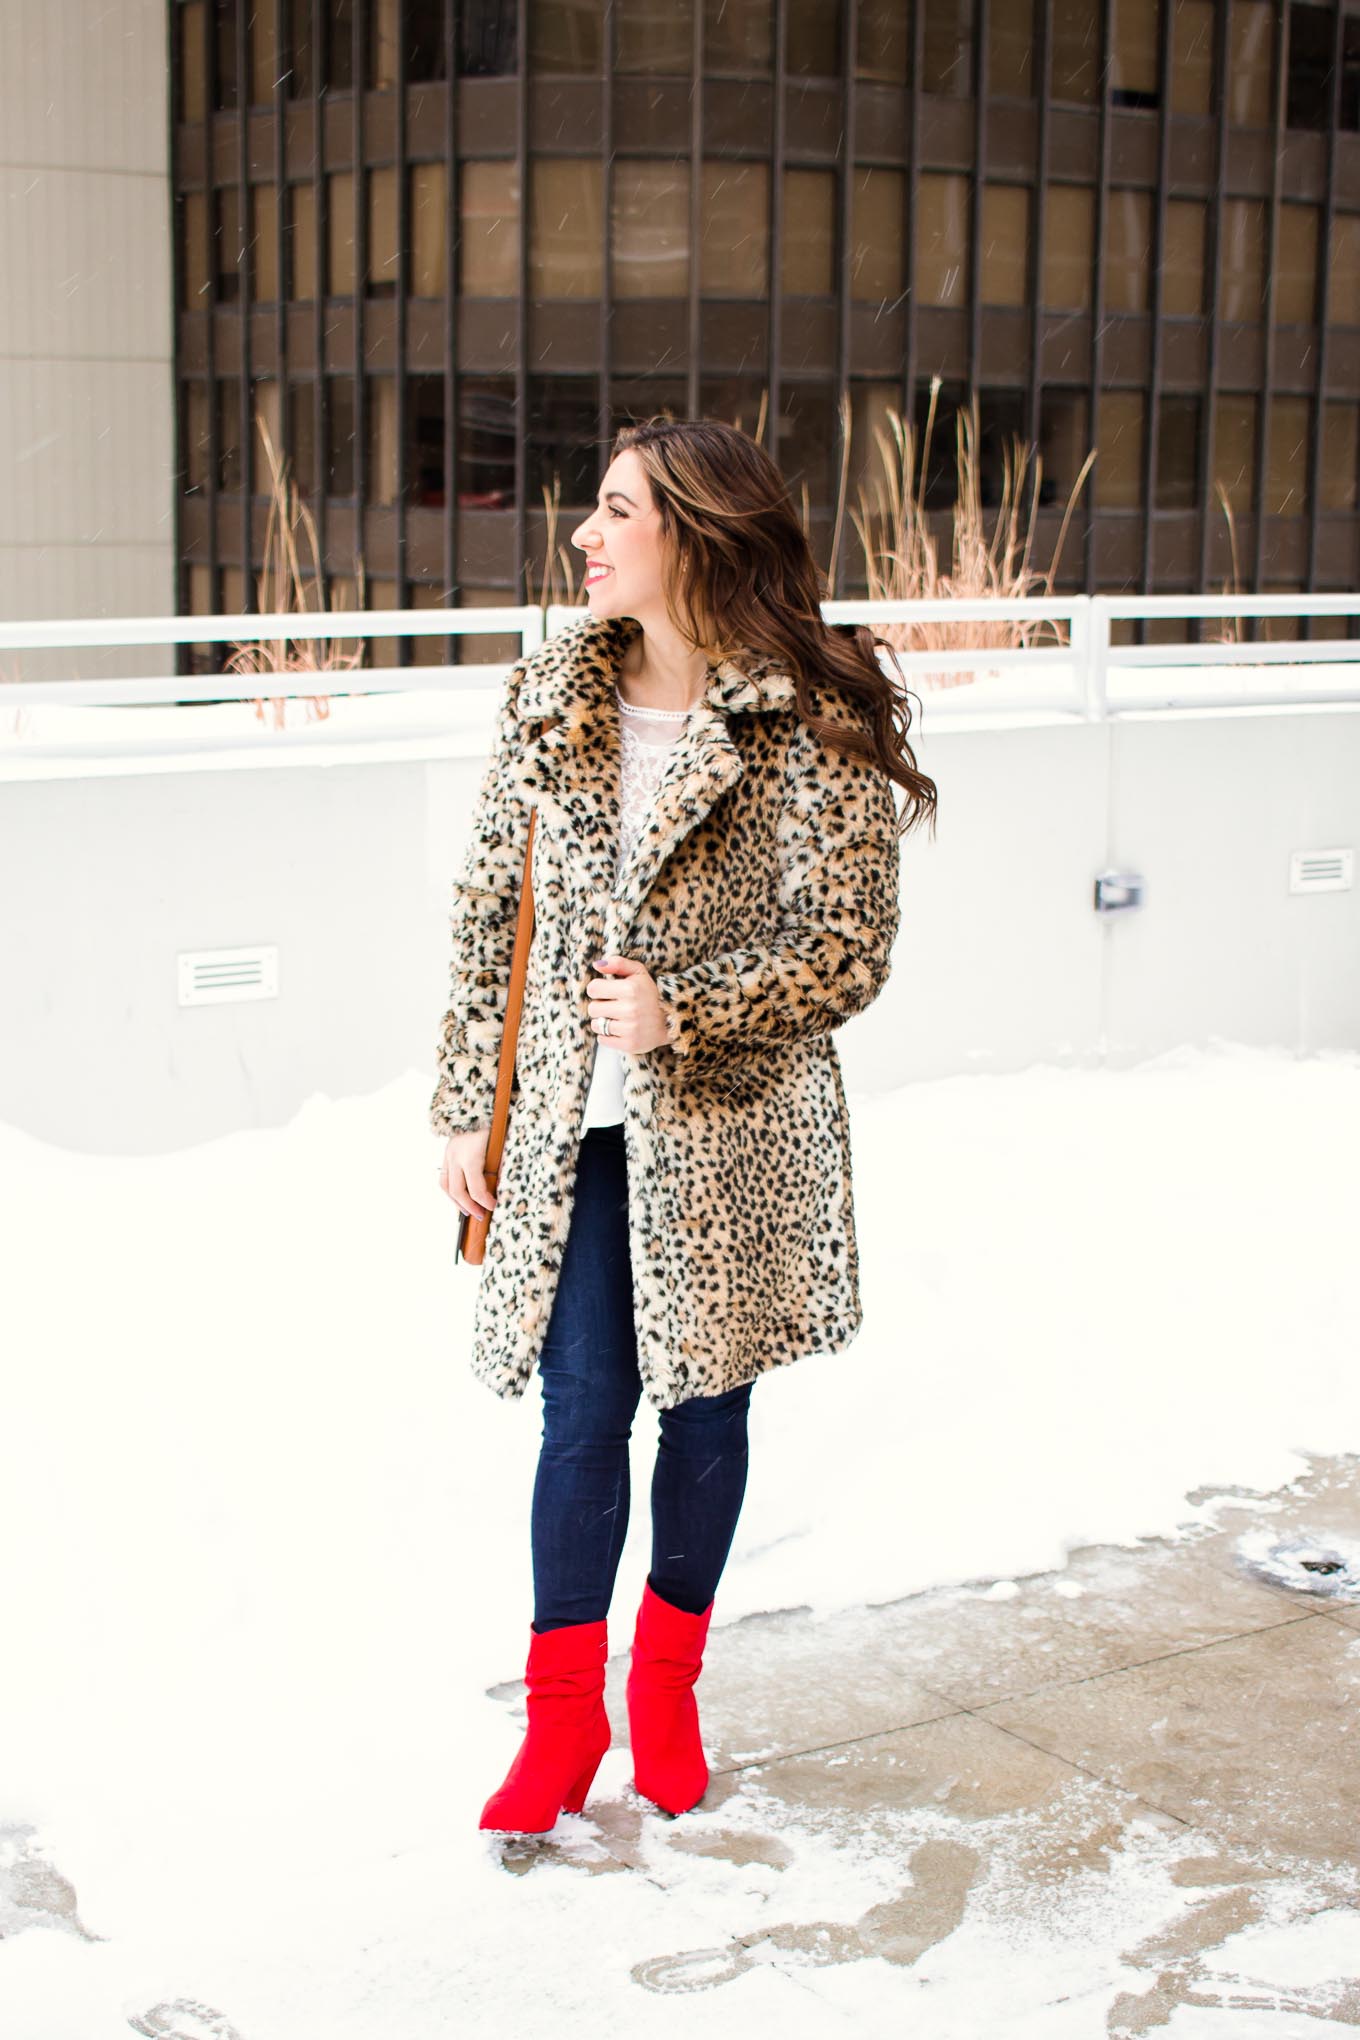 Lifestyle blogger Roxanne of Glass of Glam wearing a white lace Shein top, leopard coat, Mott and Bow denim, and red booties. - SheIn White Lace Top outfit by popular Chicago fashion blogger Glass of Glam